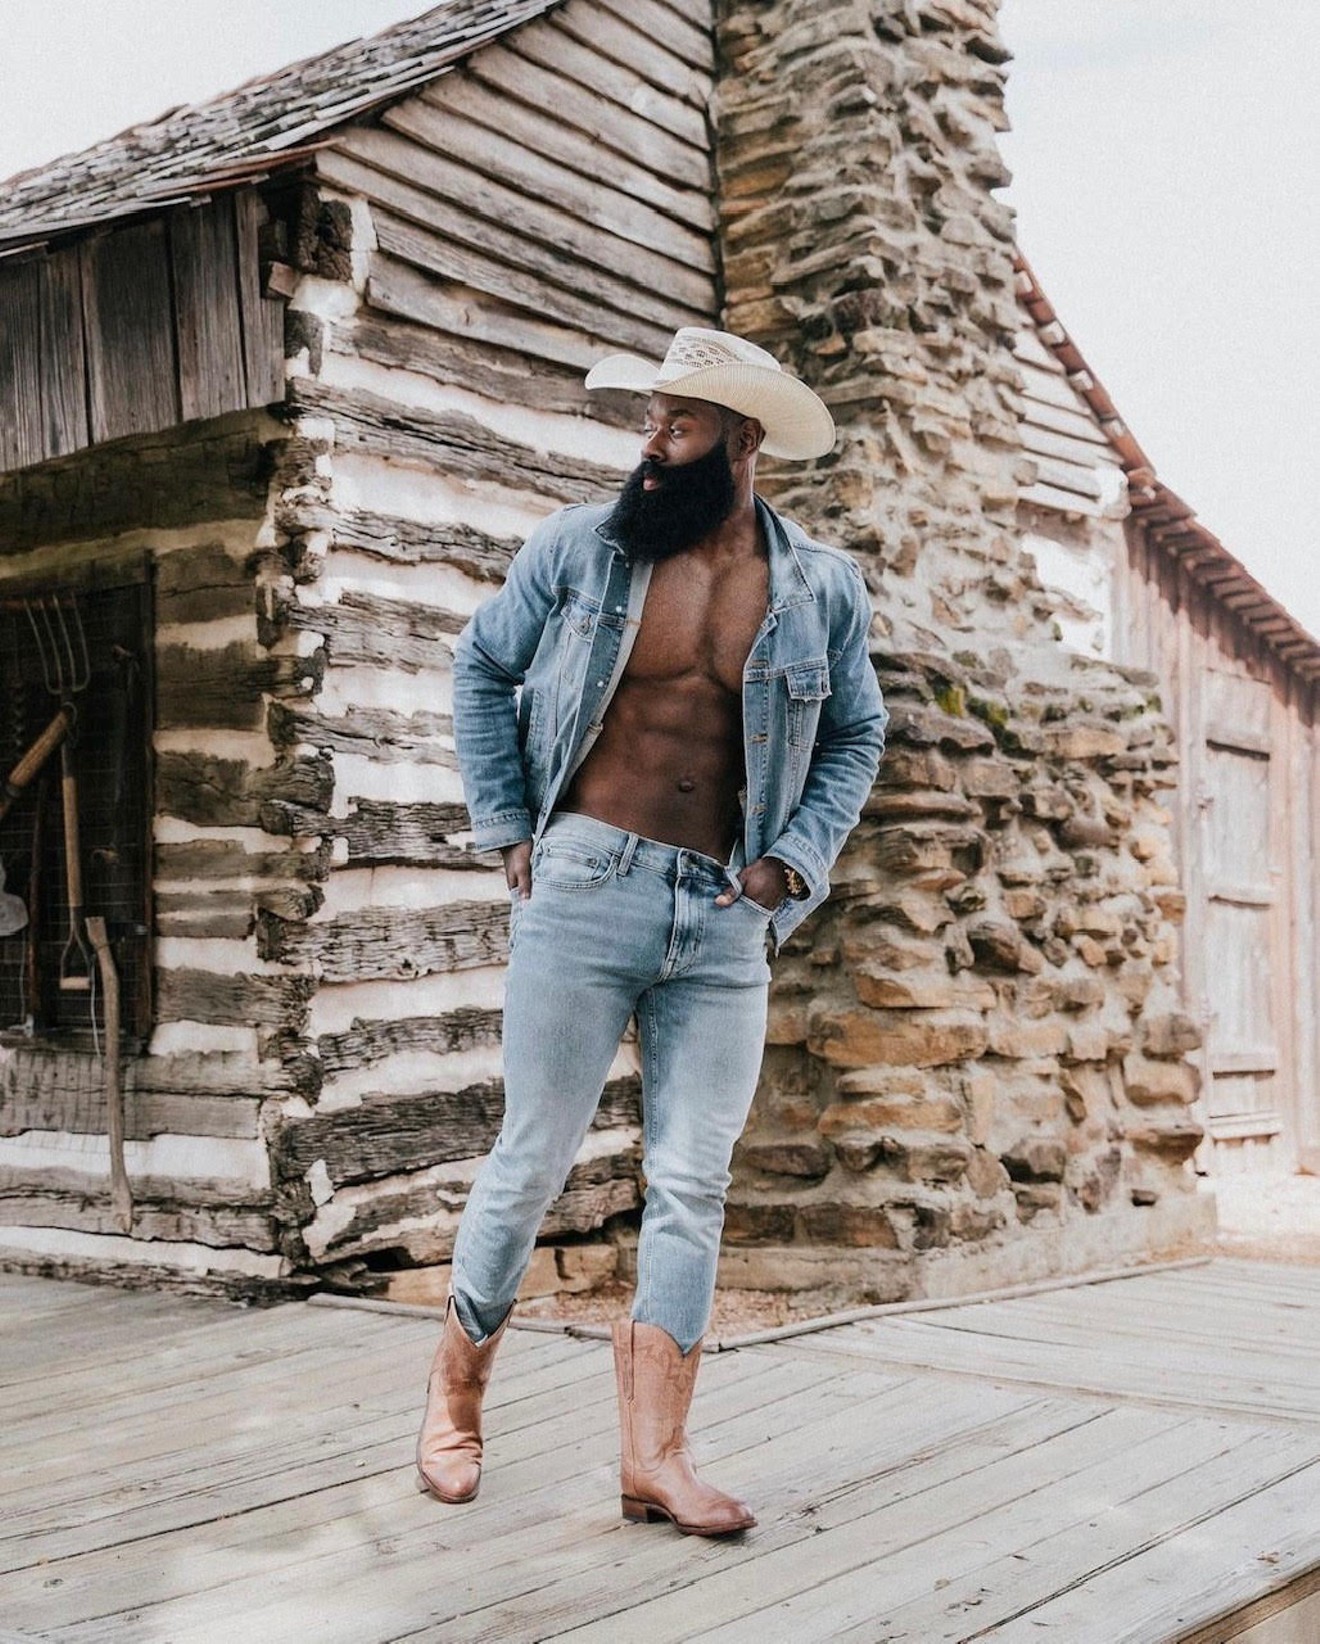 Men’s fashion influencer and Wilhelmina model Queyoun Makor says Beyoncé has exposed Western style to new audiences.